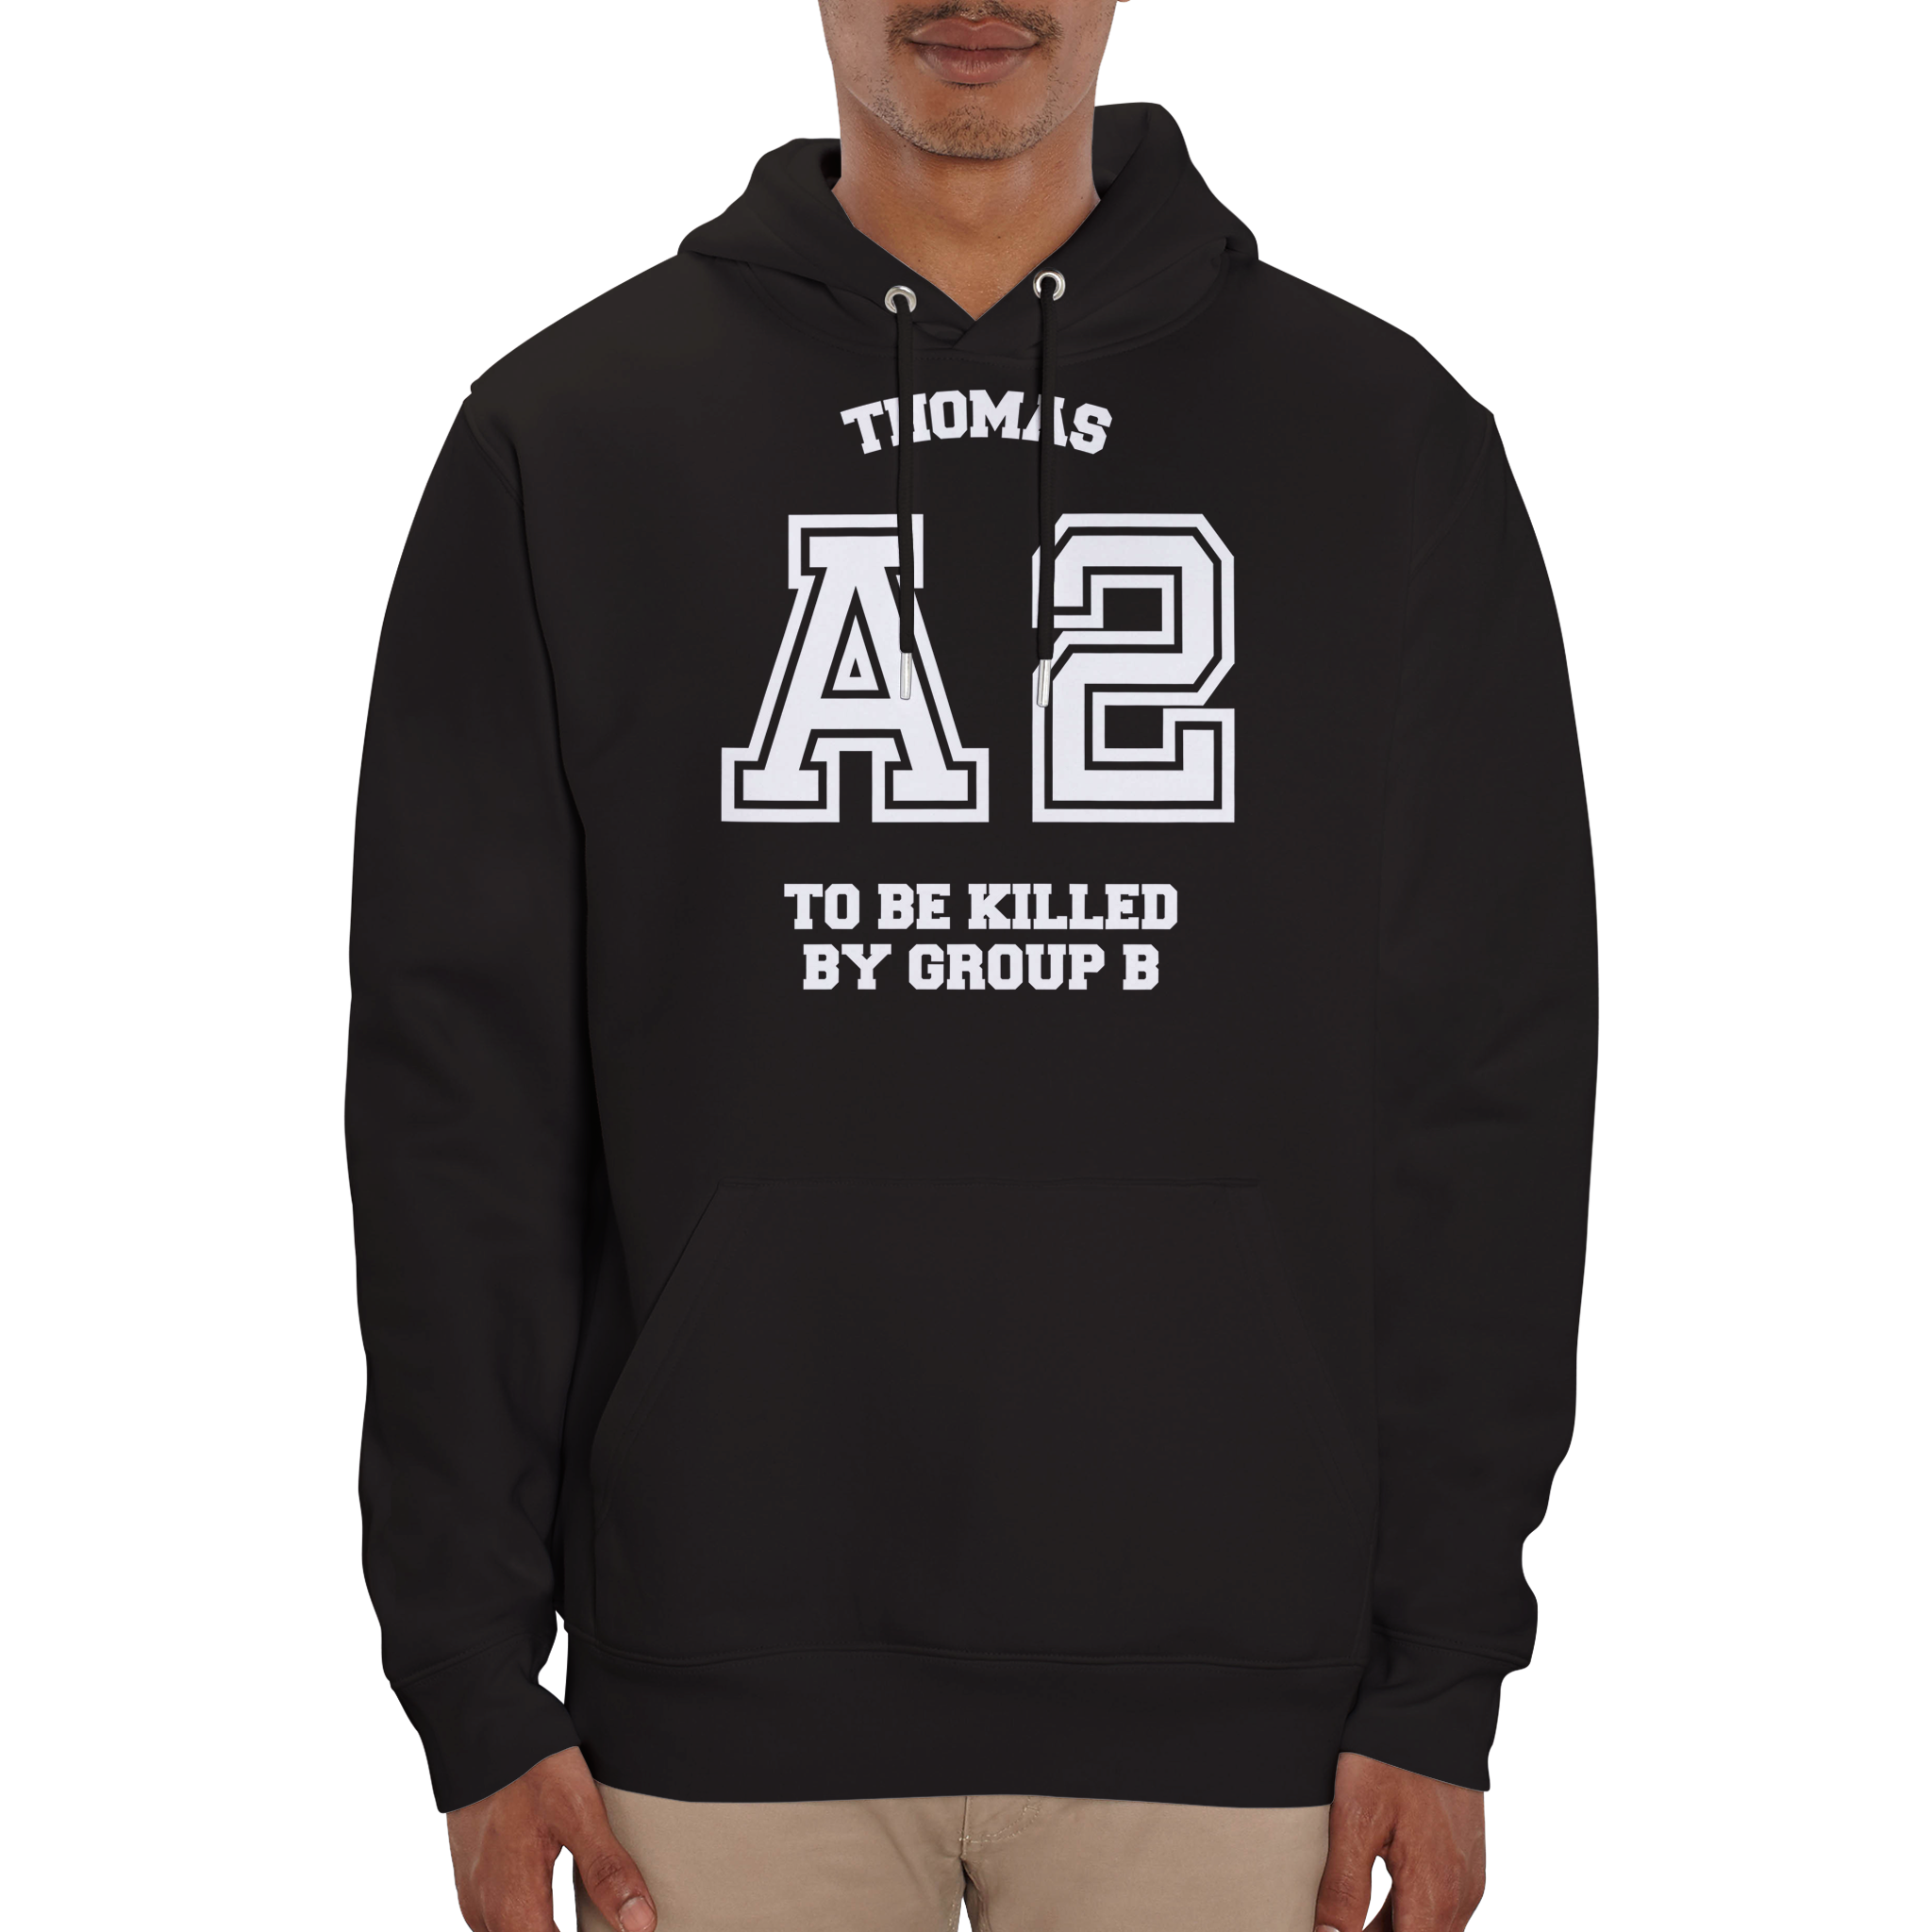 Thomas A2 Hoodie - To Be Killed By Group B